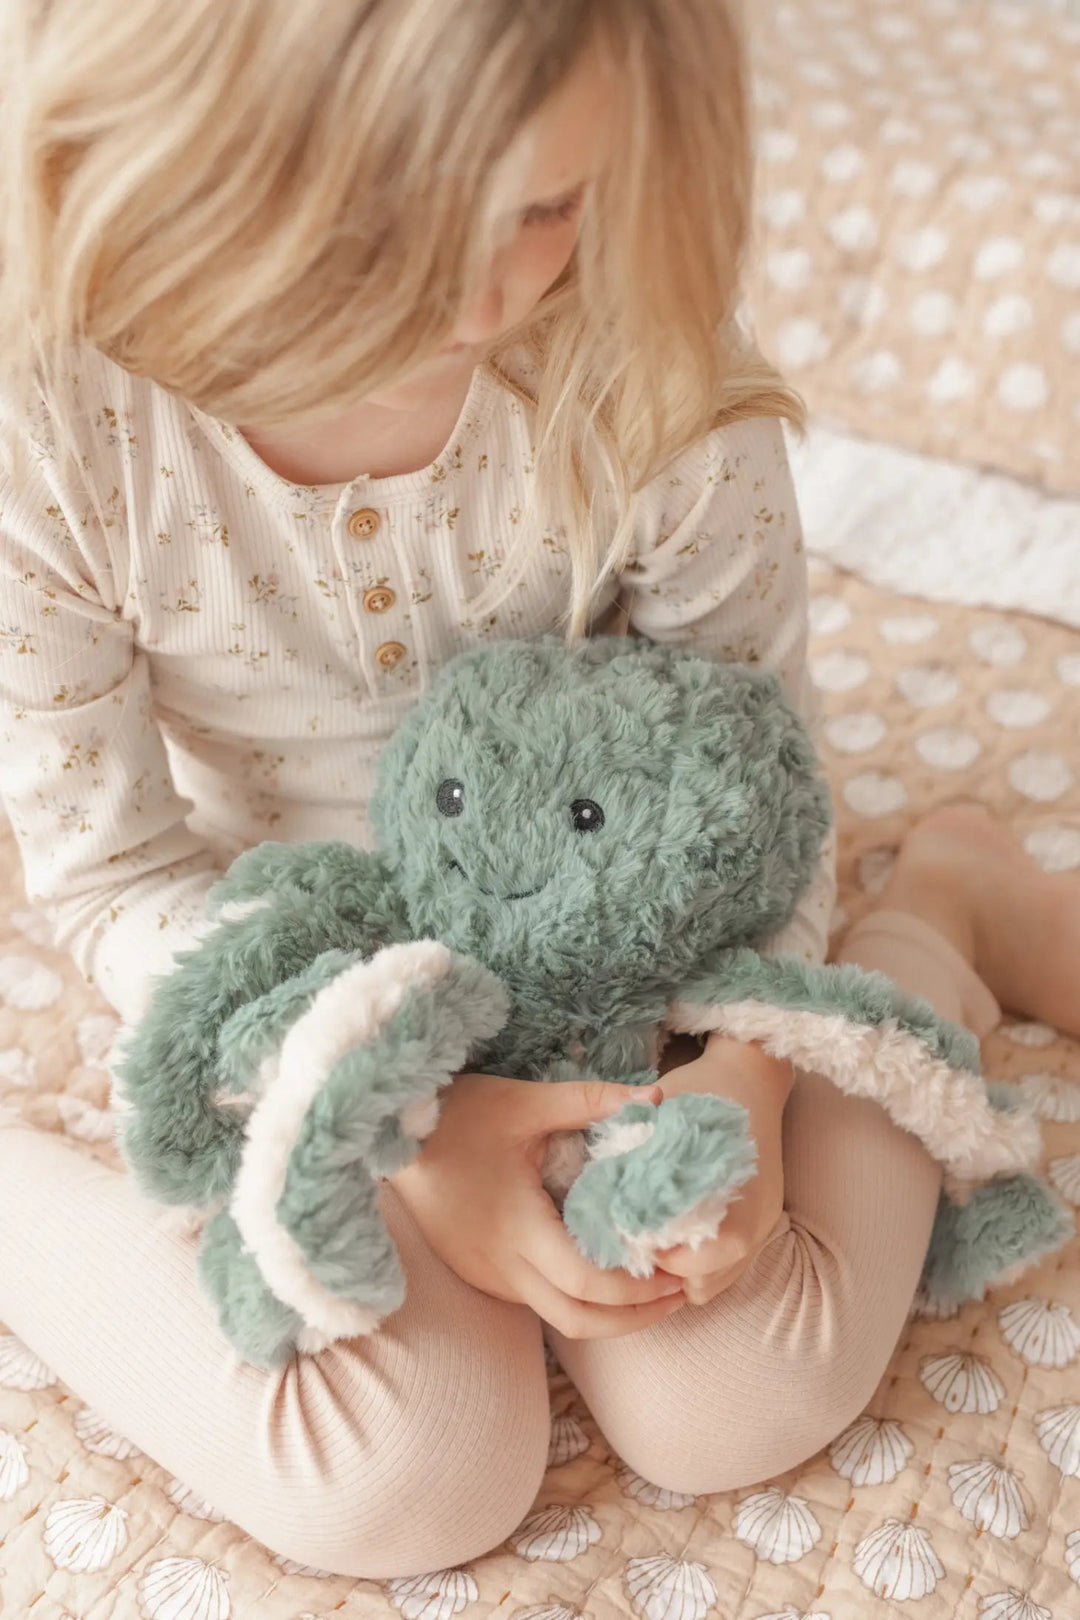 NEW Mindful & Co Kids Ollie The Octopus Weighted Buddy - #HolaNanu#NDIS #creativekids